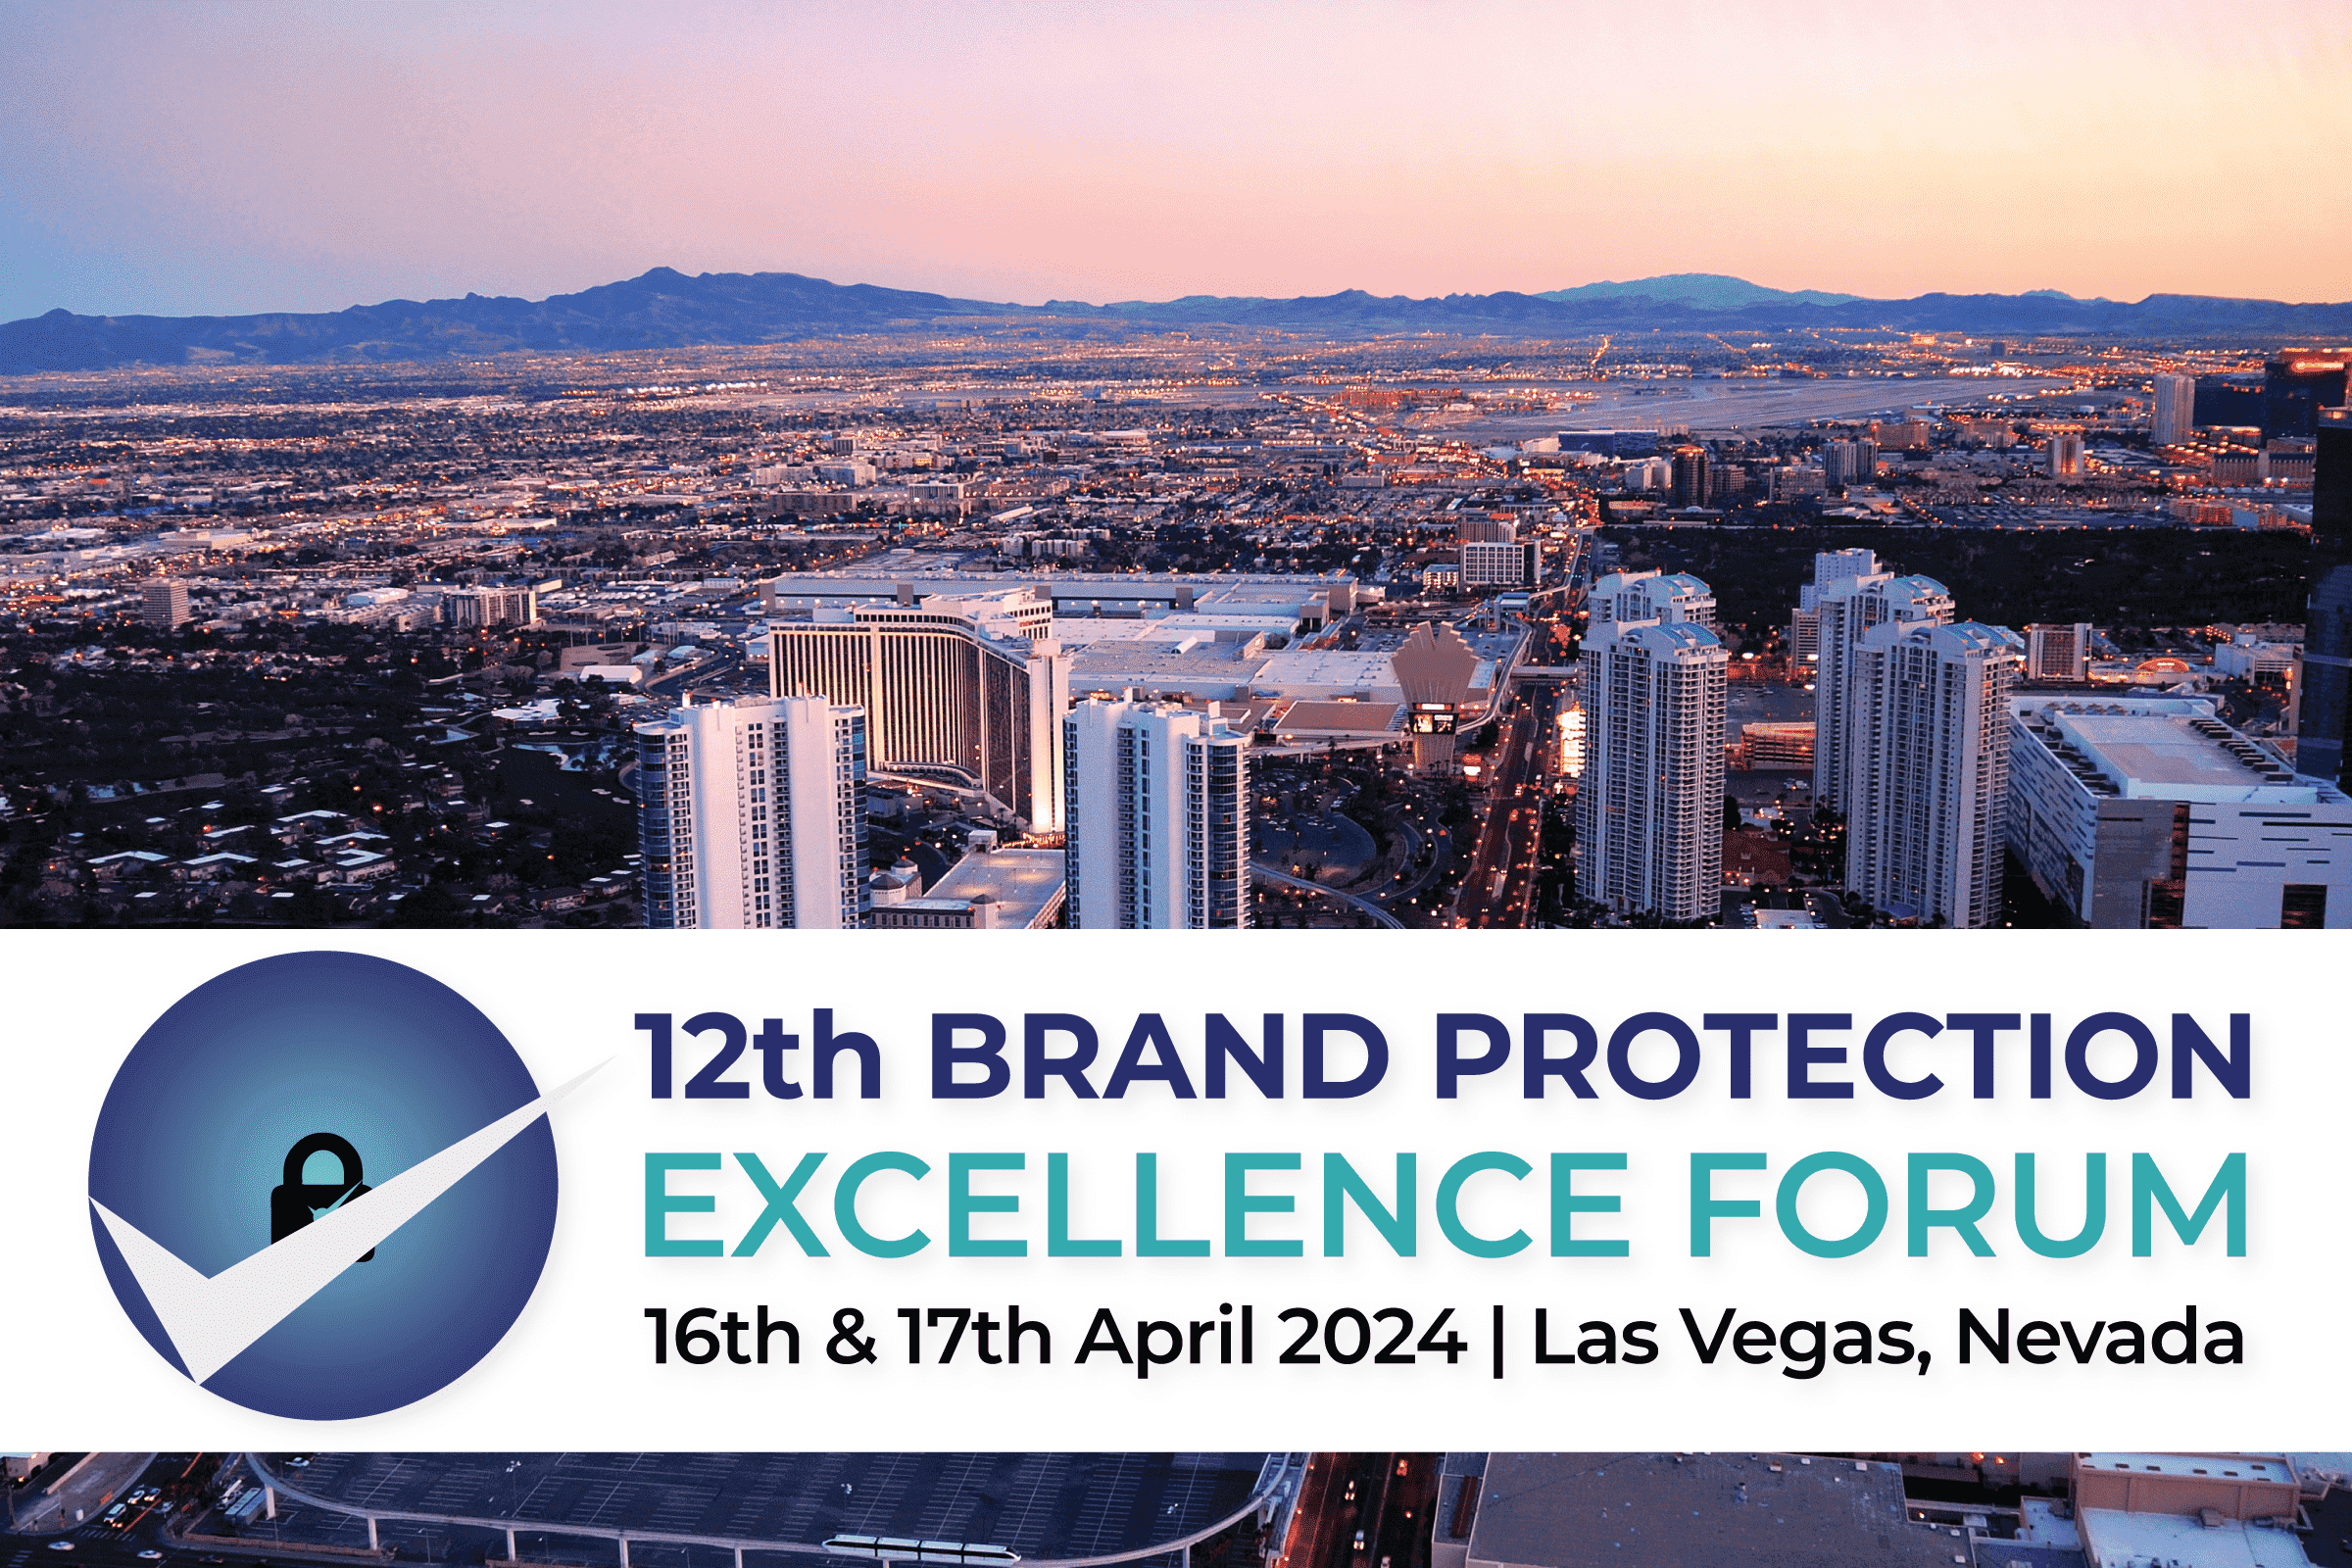 12th Brand Protection Excellence Forum 2024 organized by Kate Martin